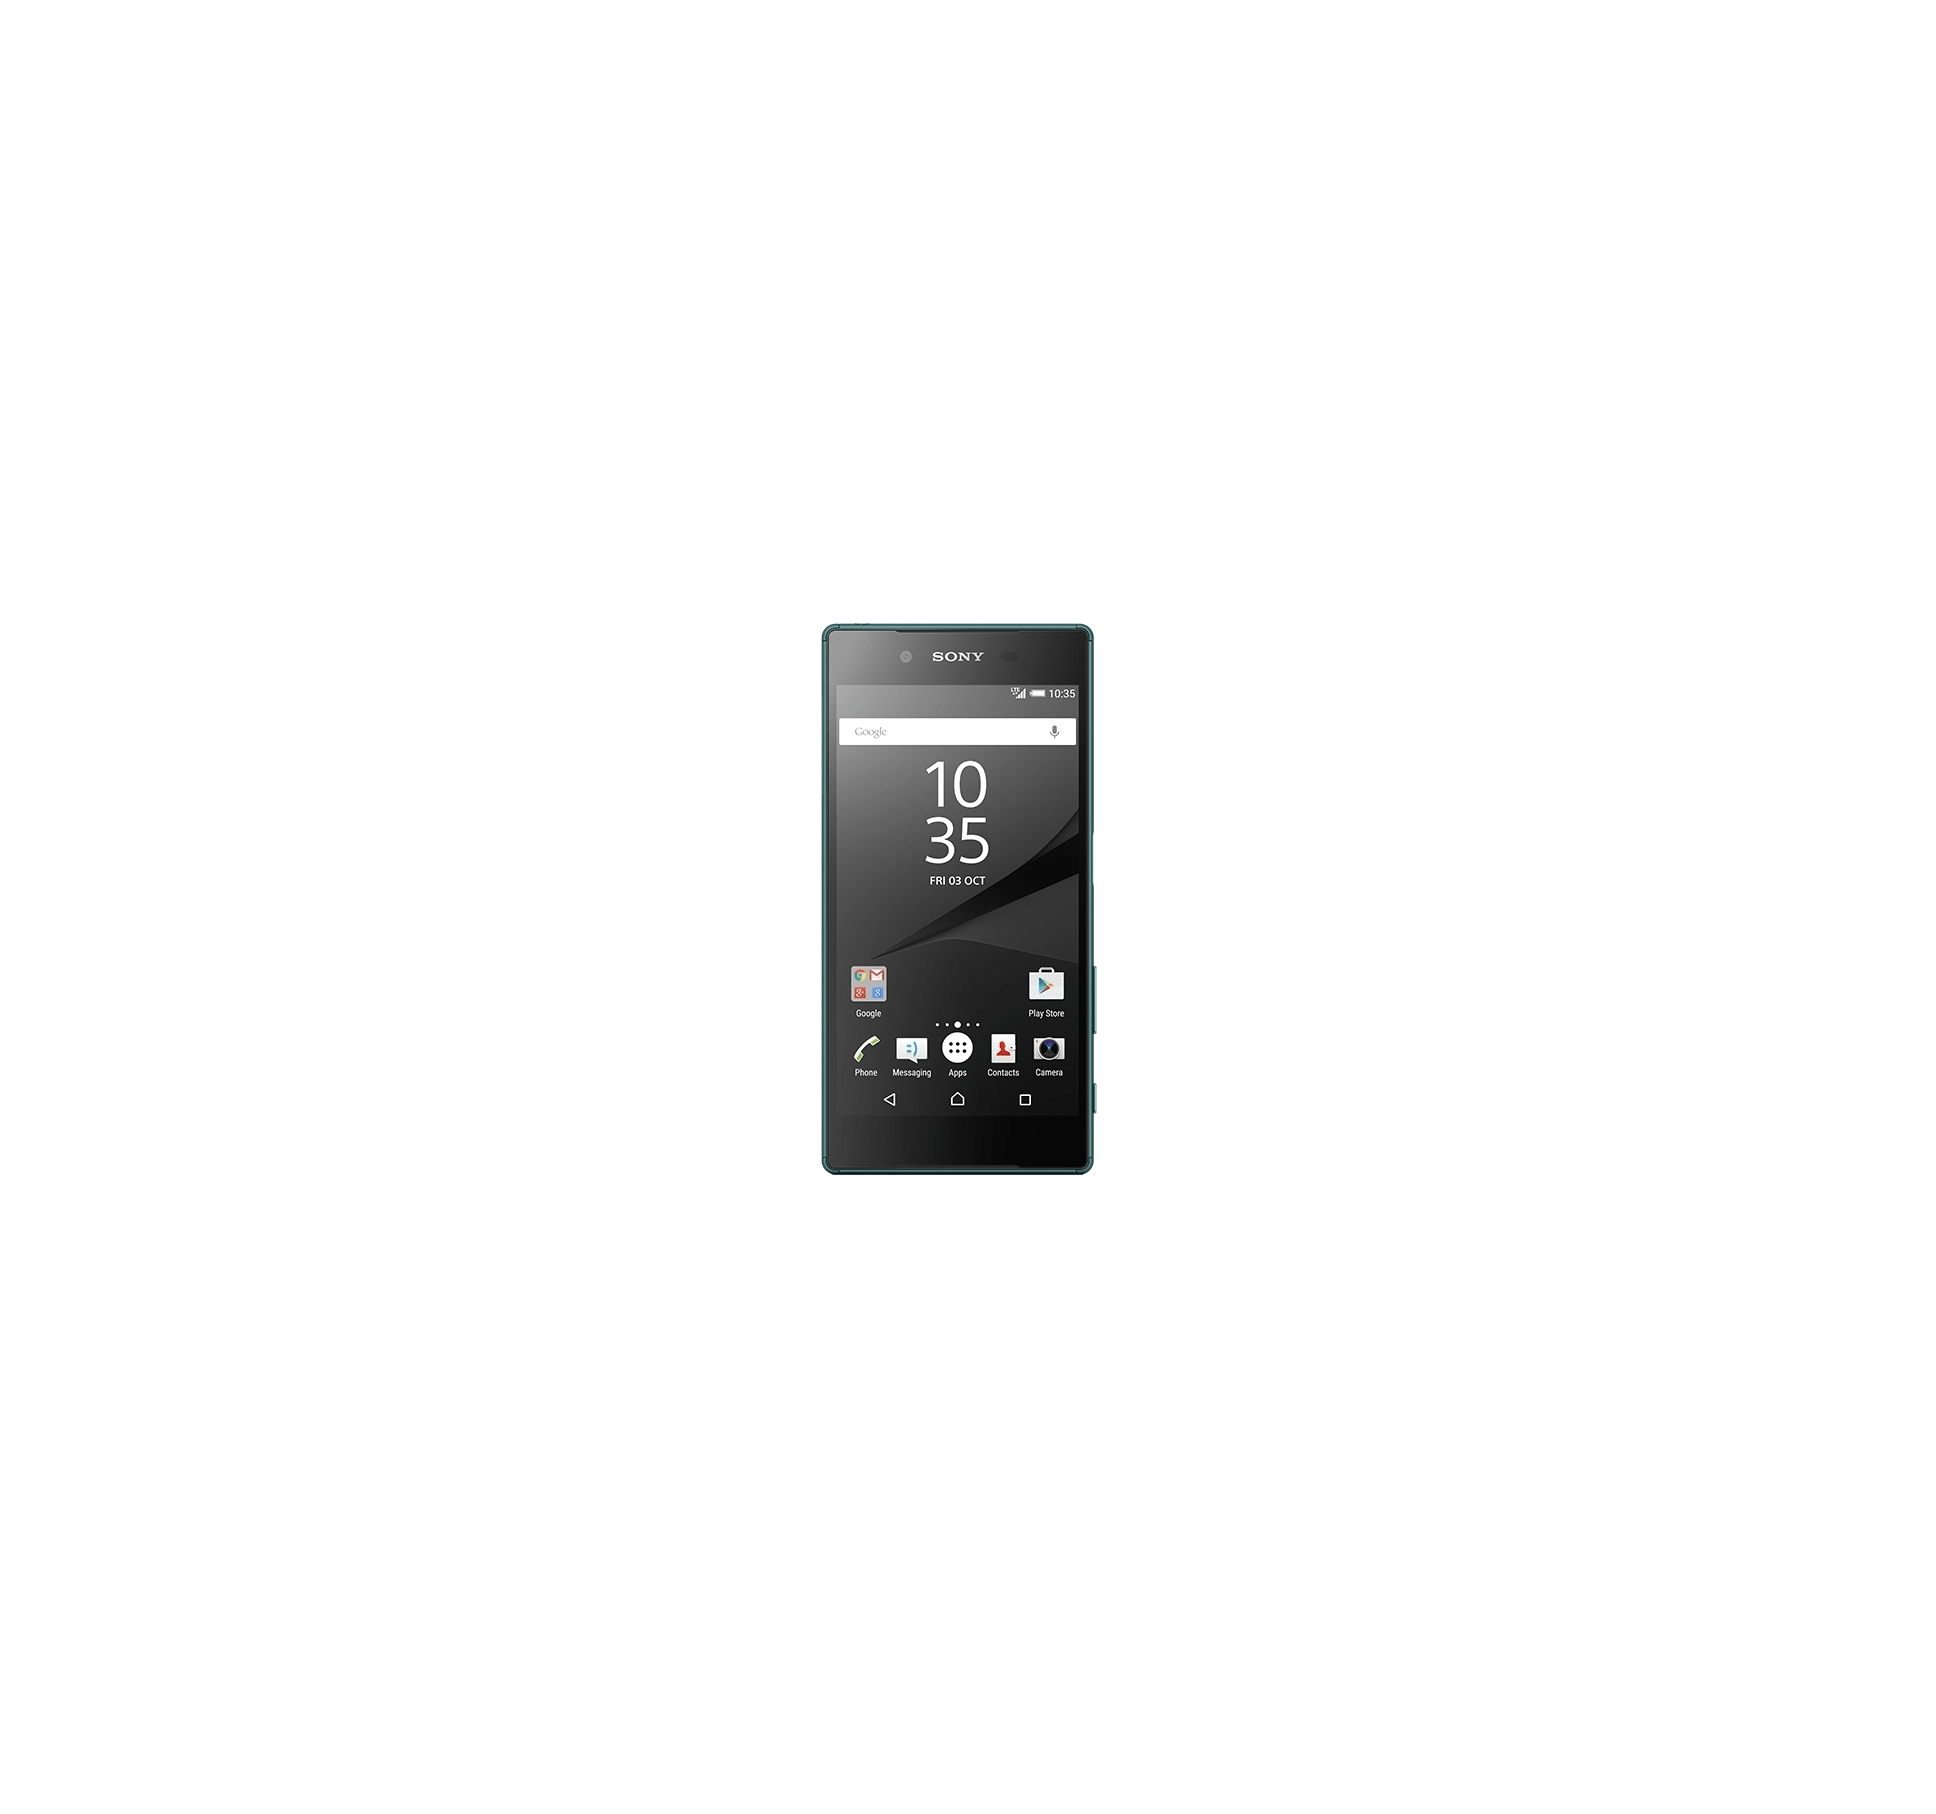 Sony xperia mobile phone reviews